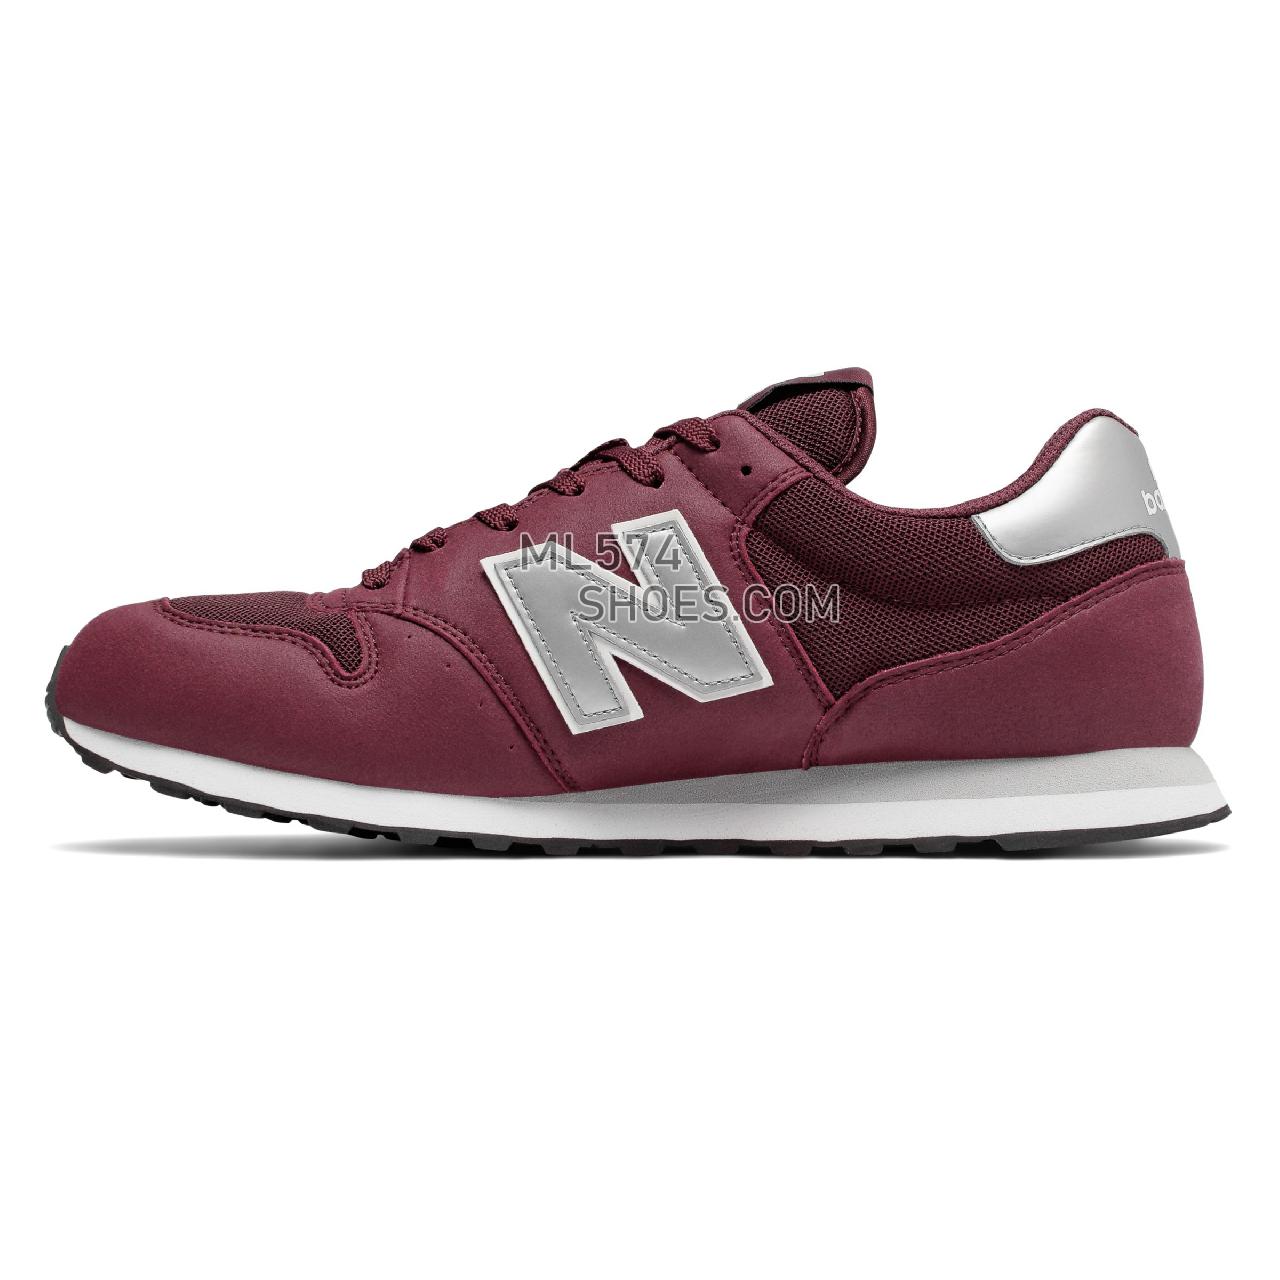 New Balance 500 Classic - Men's Classic Sneakers - Burgundy with Silver and White - GM500BUS